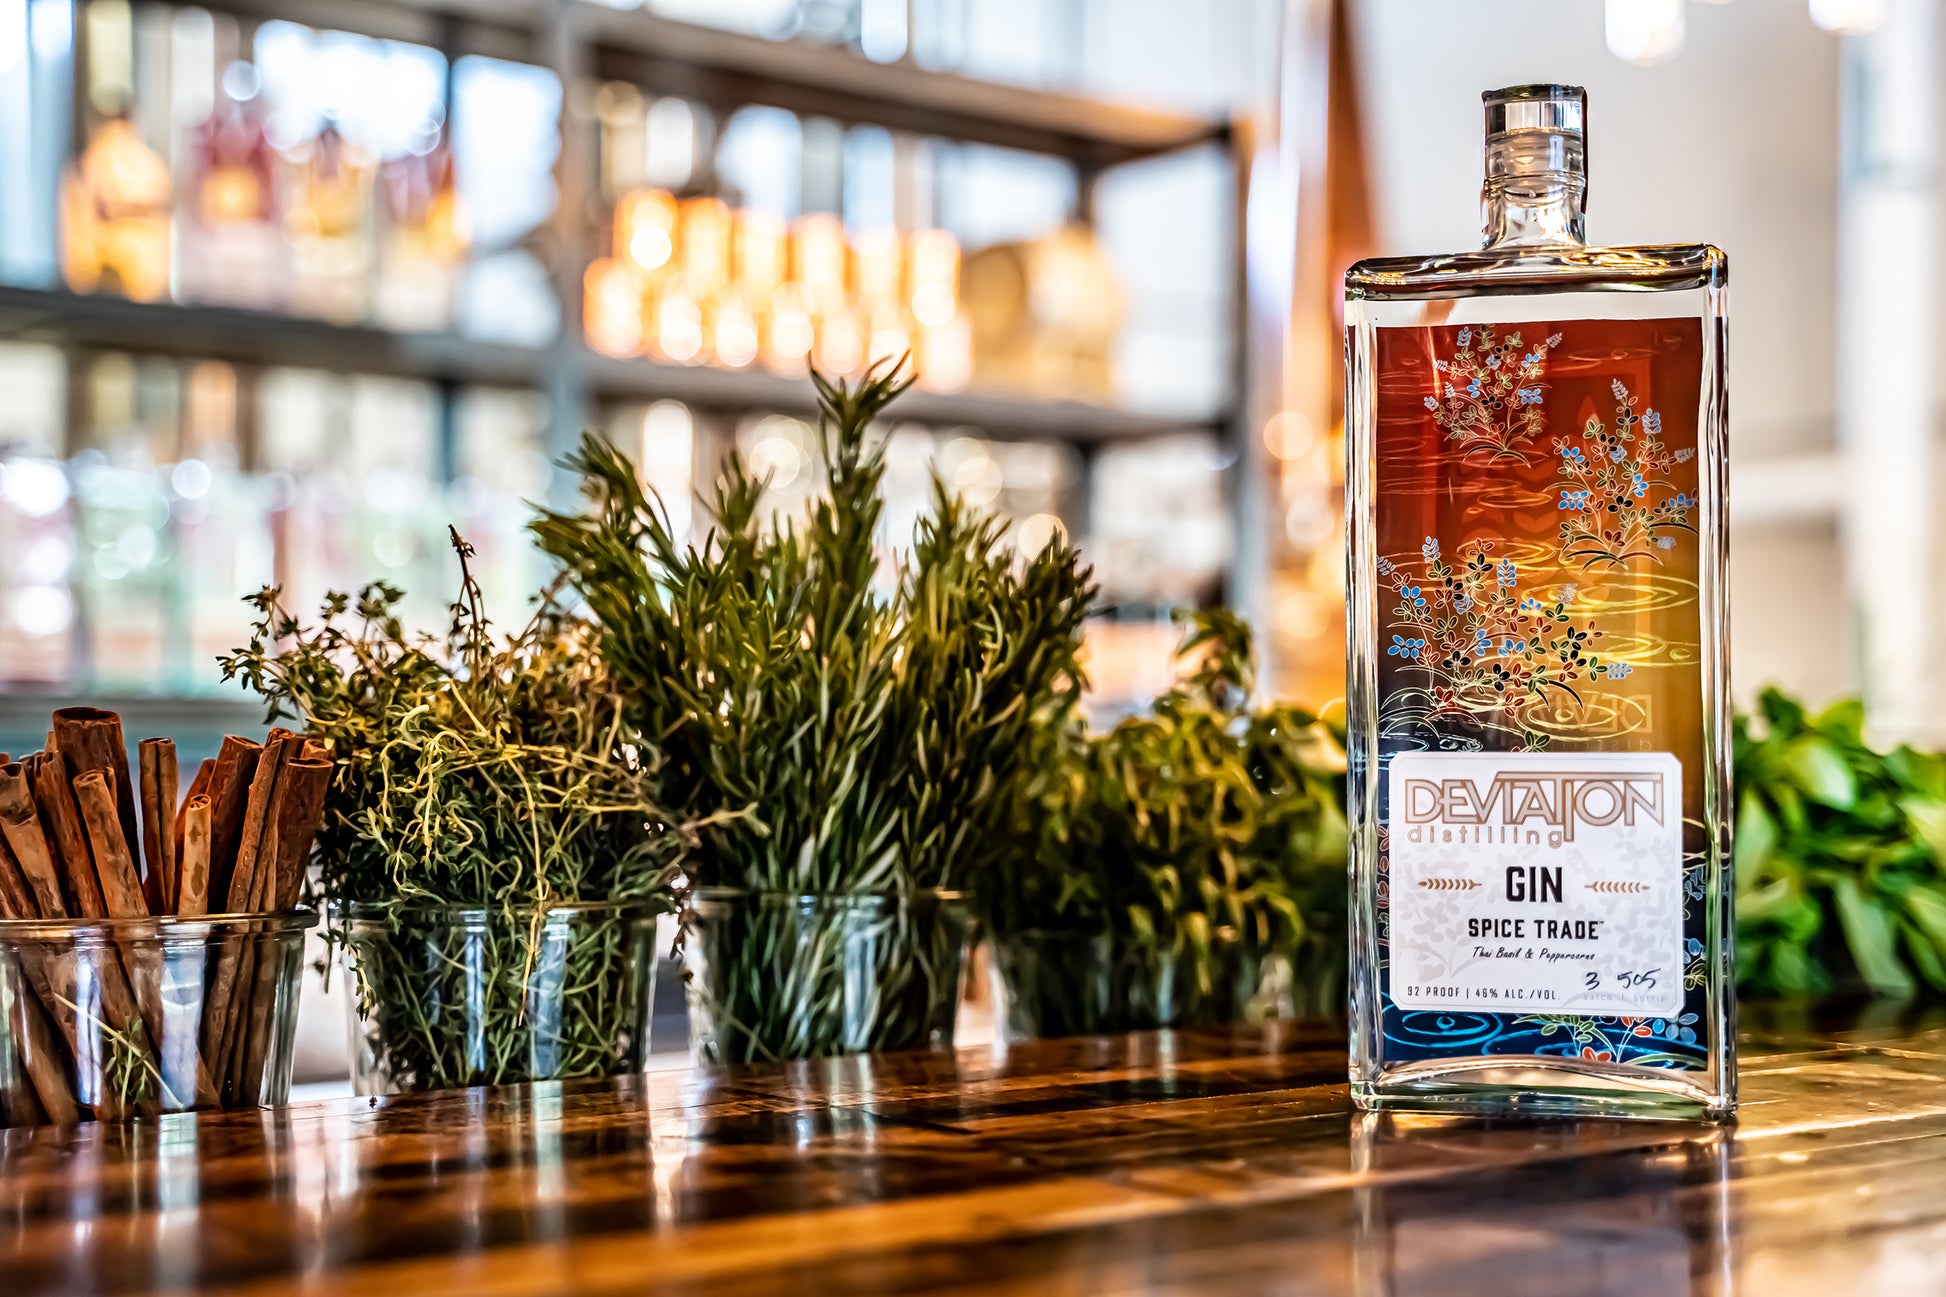 Engine Gin rapped for 'therapeutic' link - The Spirits Business